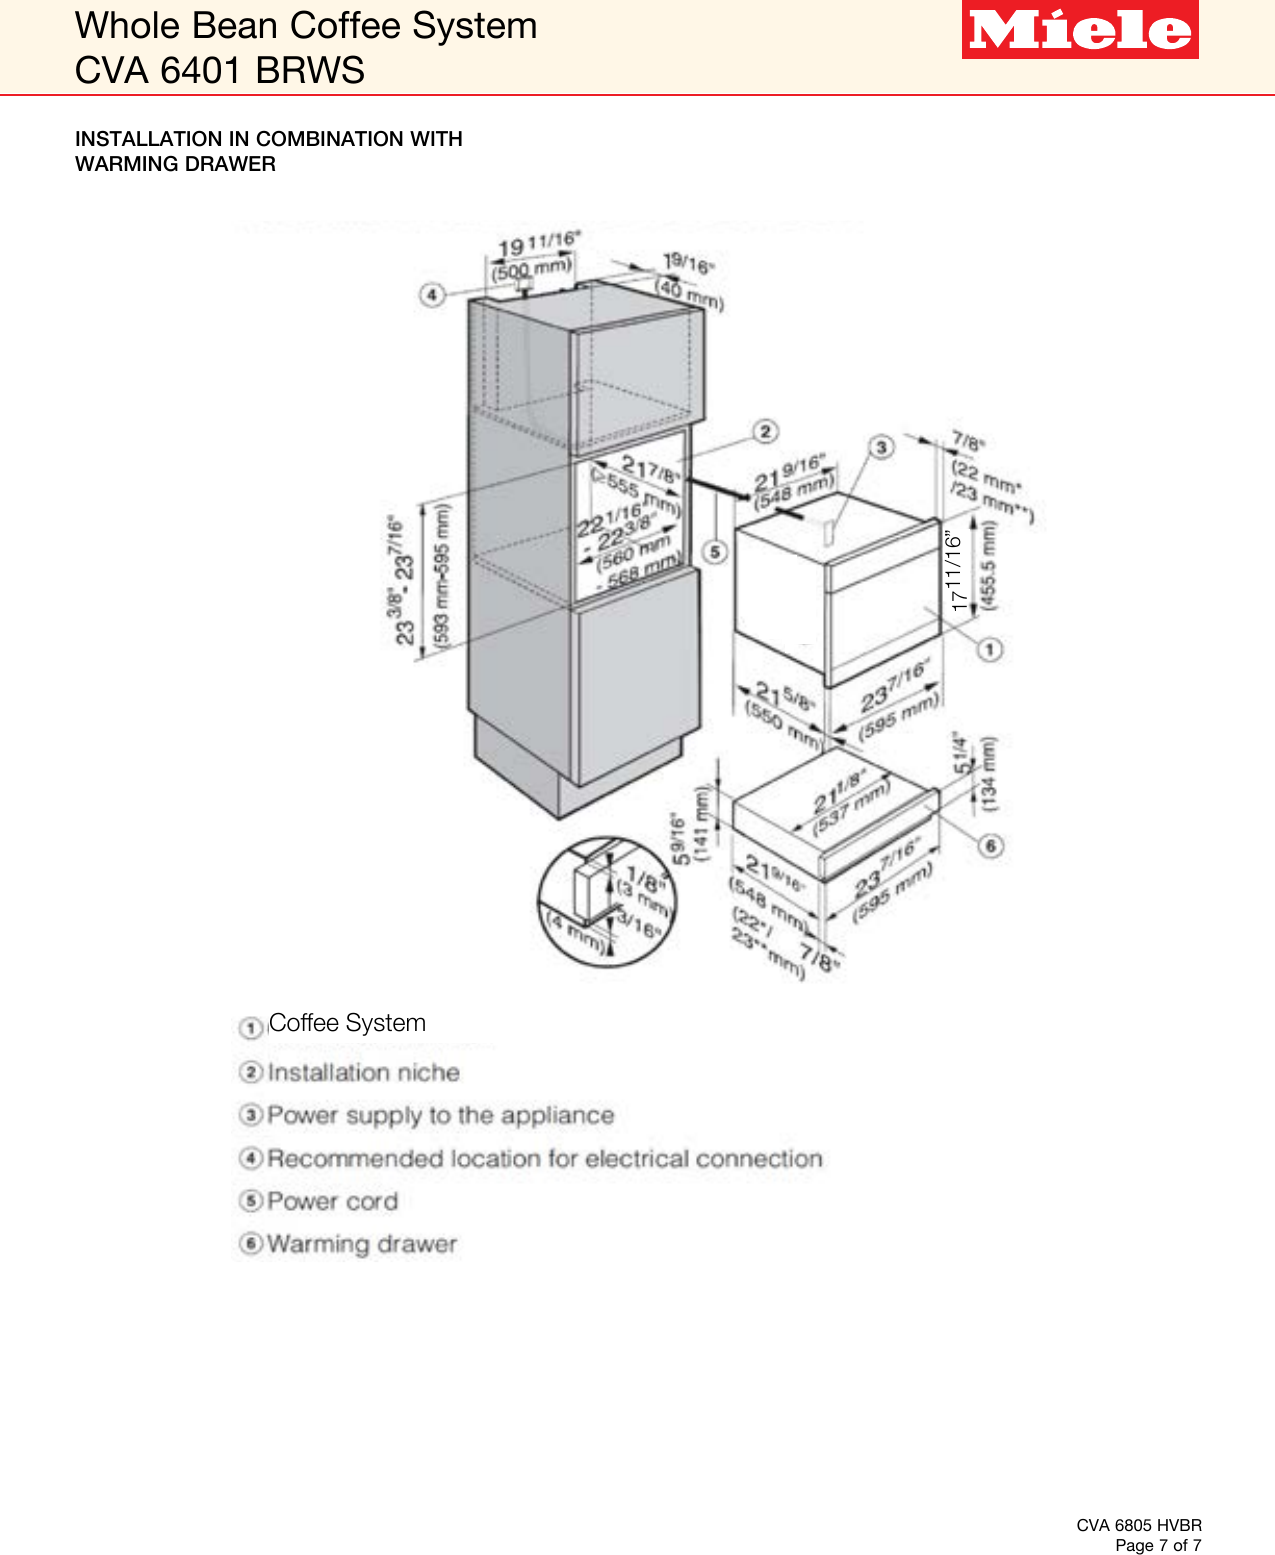 Page 7 of 7 - Miele Miele-Cva-6401-Built-In-Specification-Sheet-  Miele-cva-6401-built-in-specification-sheet